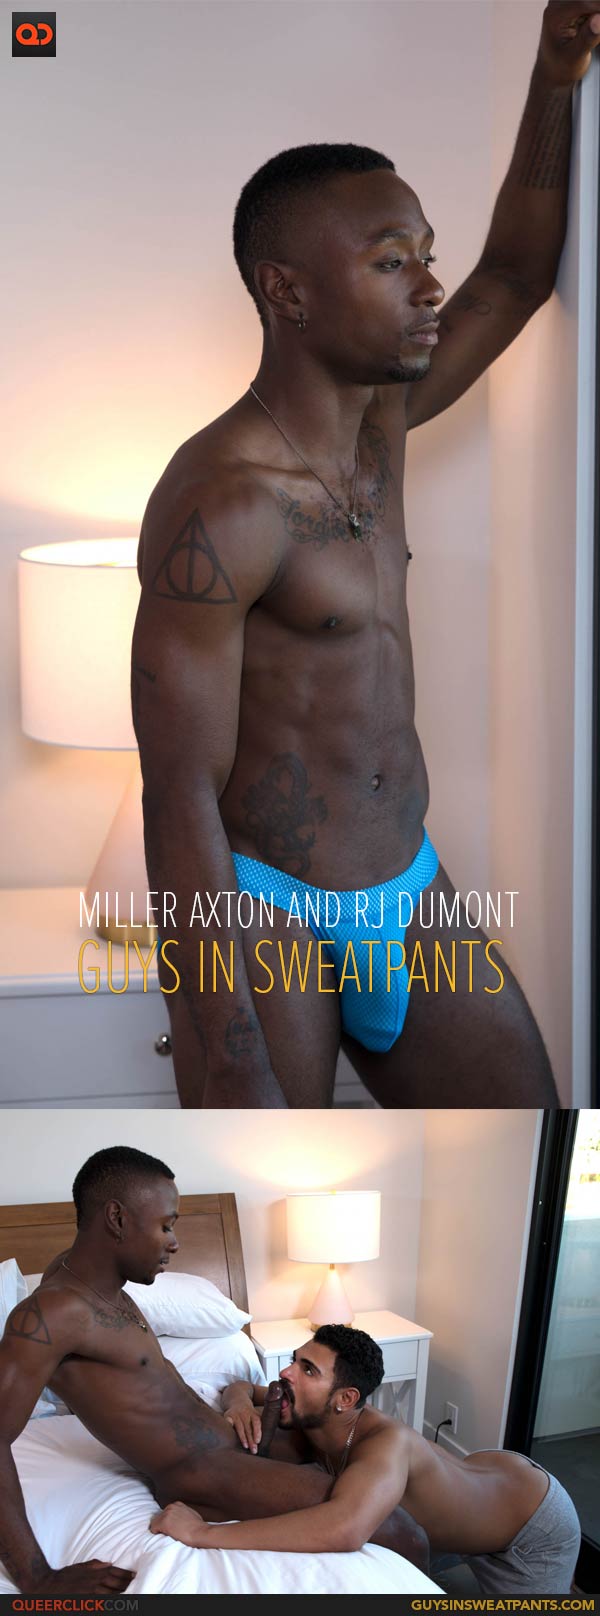 Guys in Sweatpants: Miller Axton and RJ Dumont 